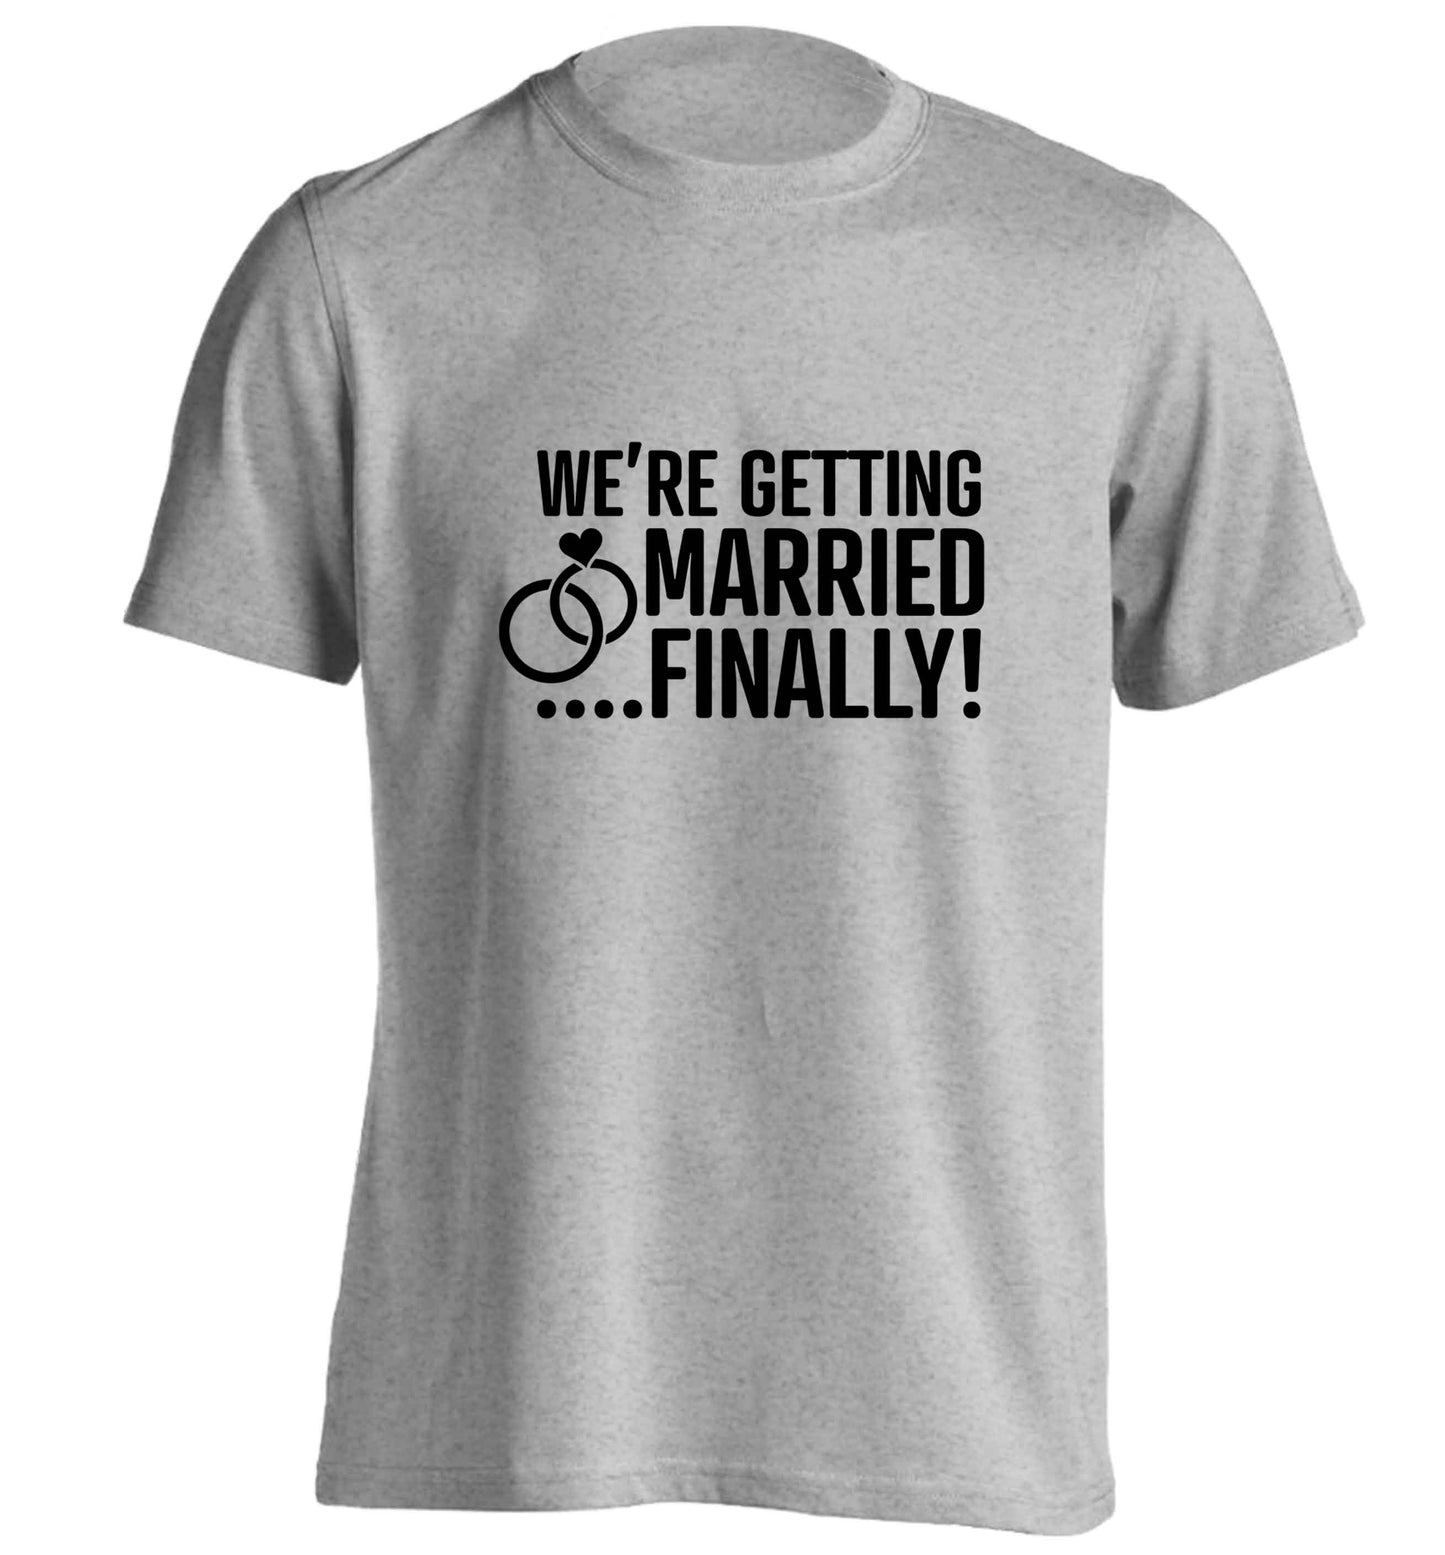 It's been a long wait but it's finally happening! Let everyone know you're celebrating your big day soon! adults unisex grey Tshirt 2XL